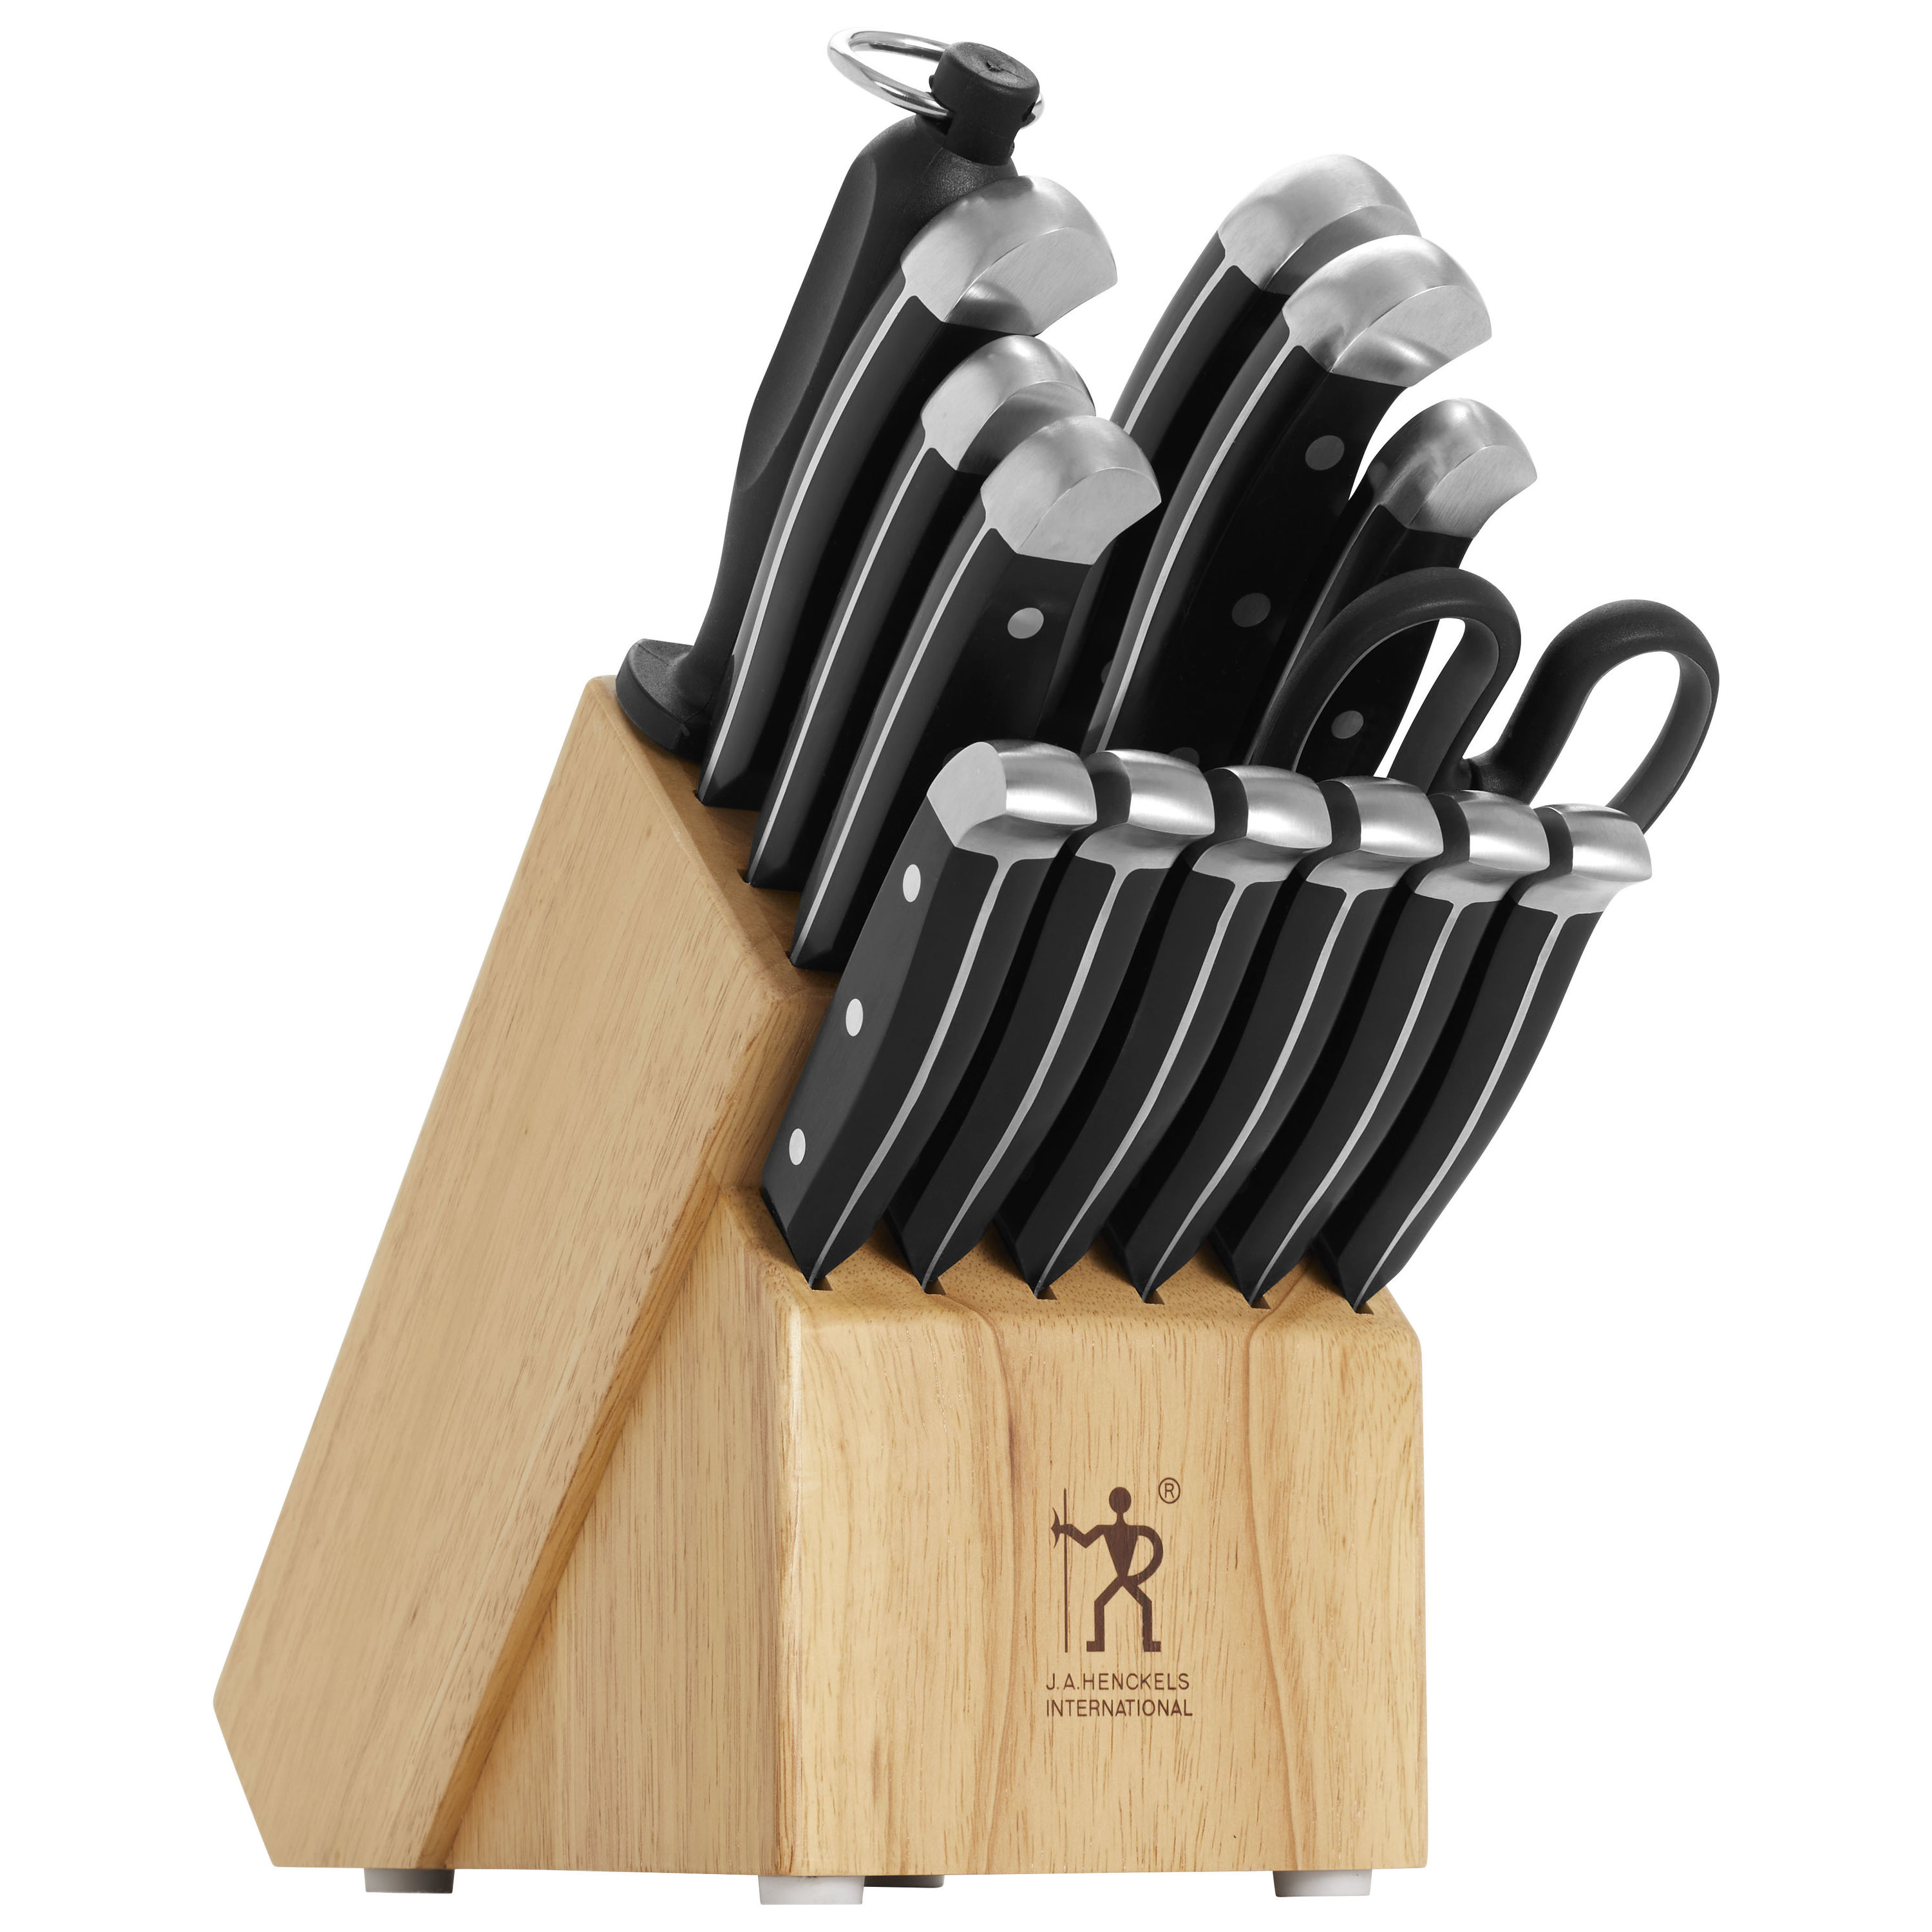 A 15-Piece Set of J.A. Henckels Knives Is Only $130 on